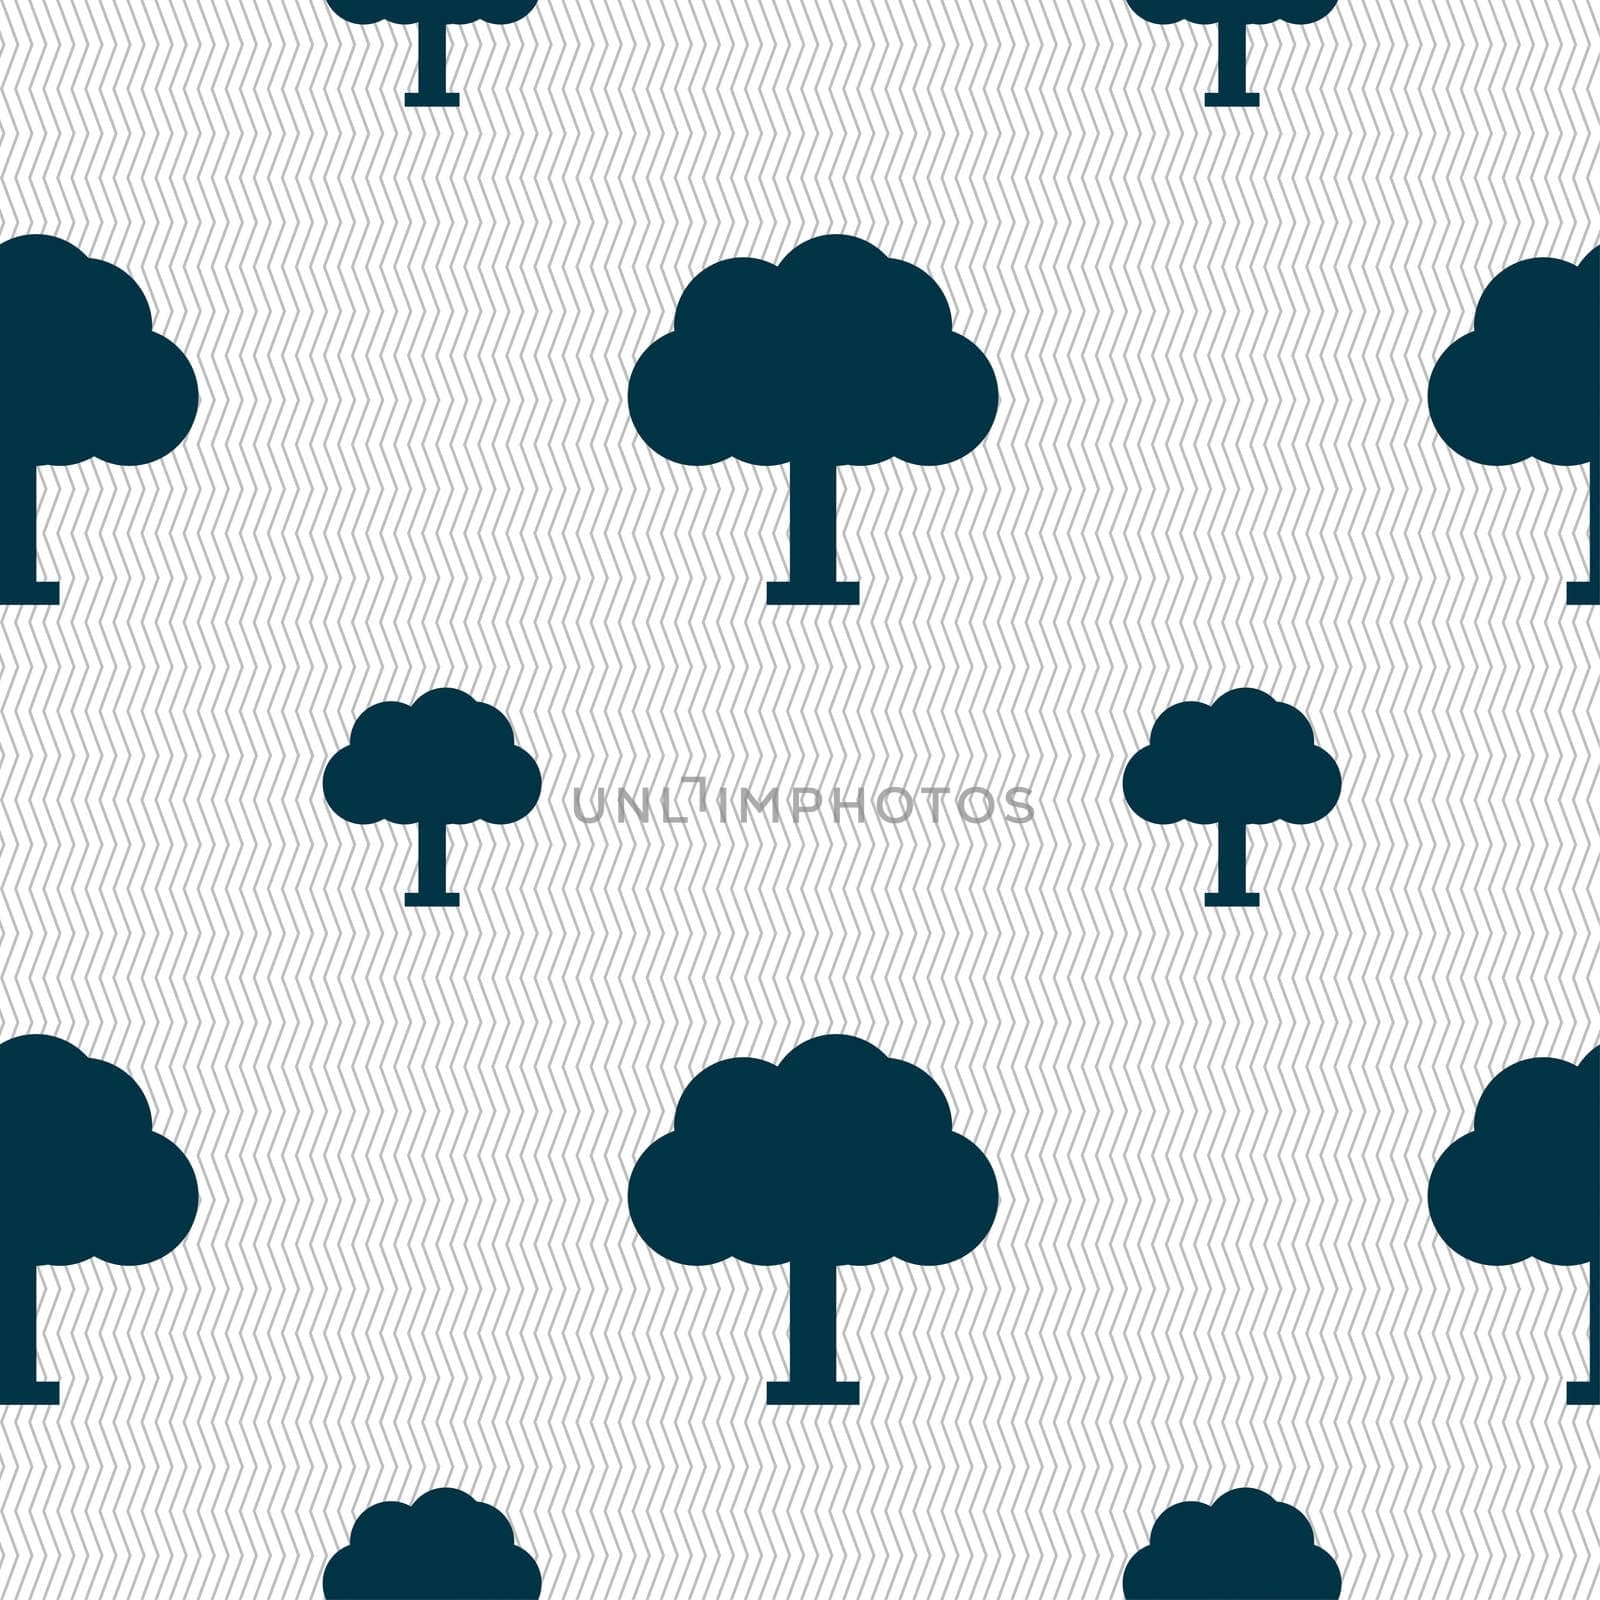 Tree, Forest icon sign. Seamless pattern with geometric texture. illustration